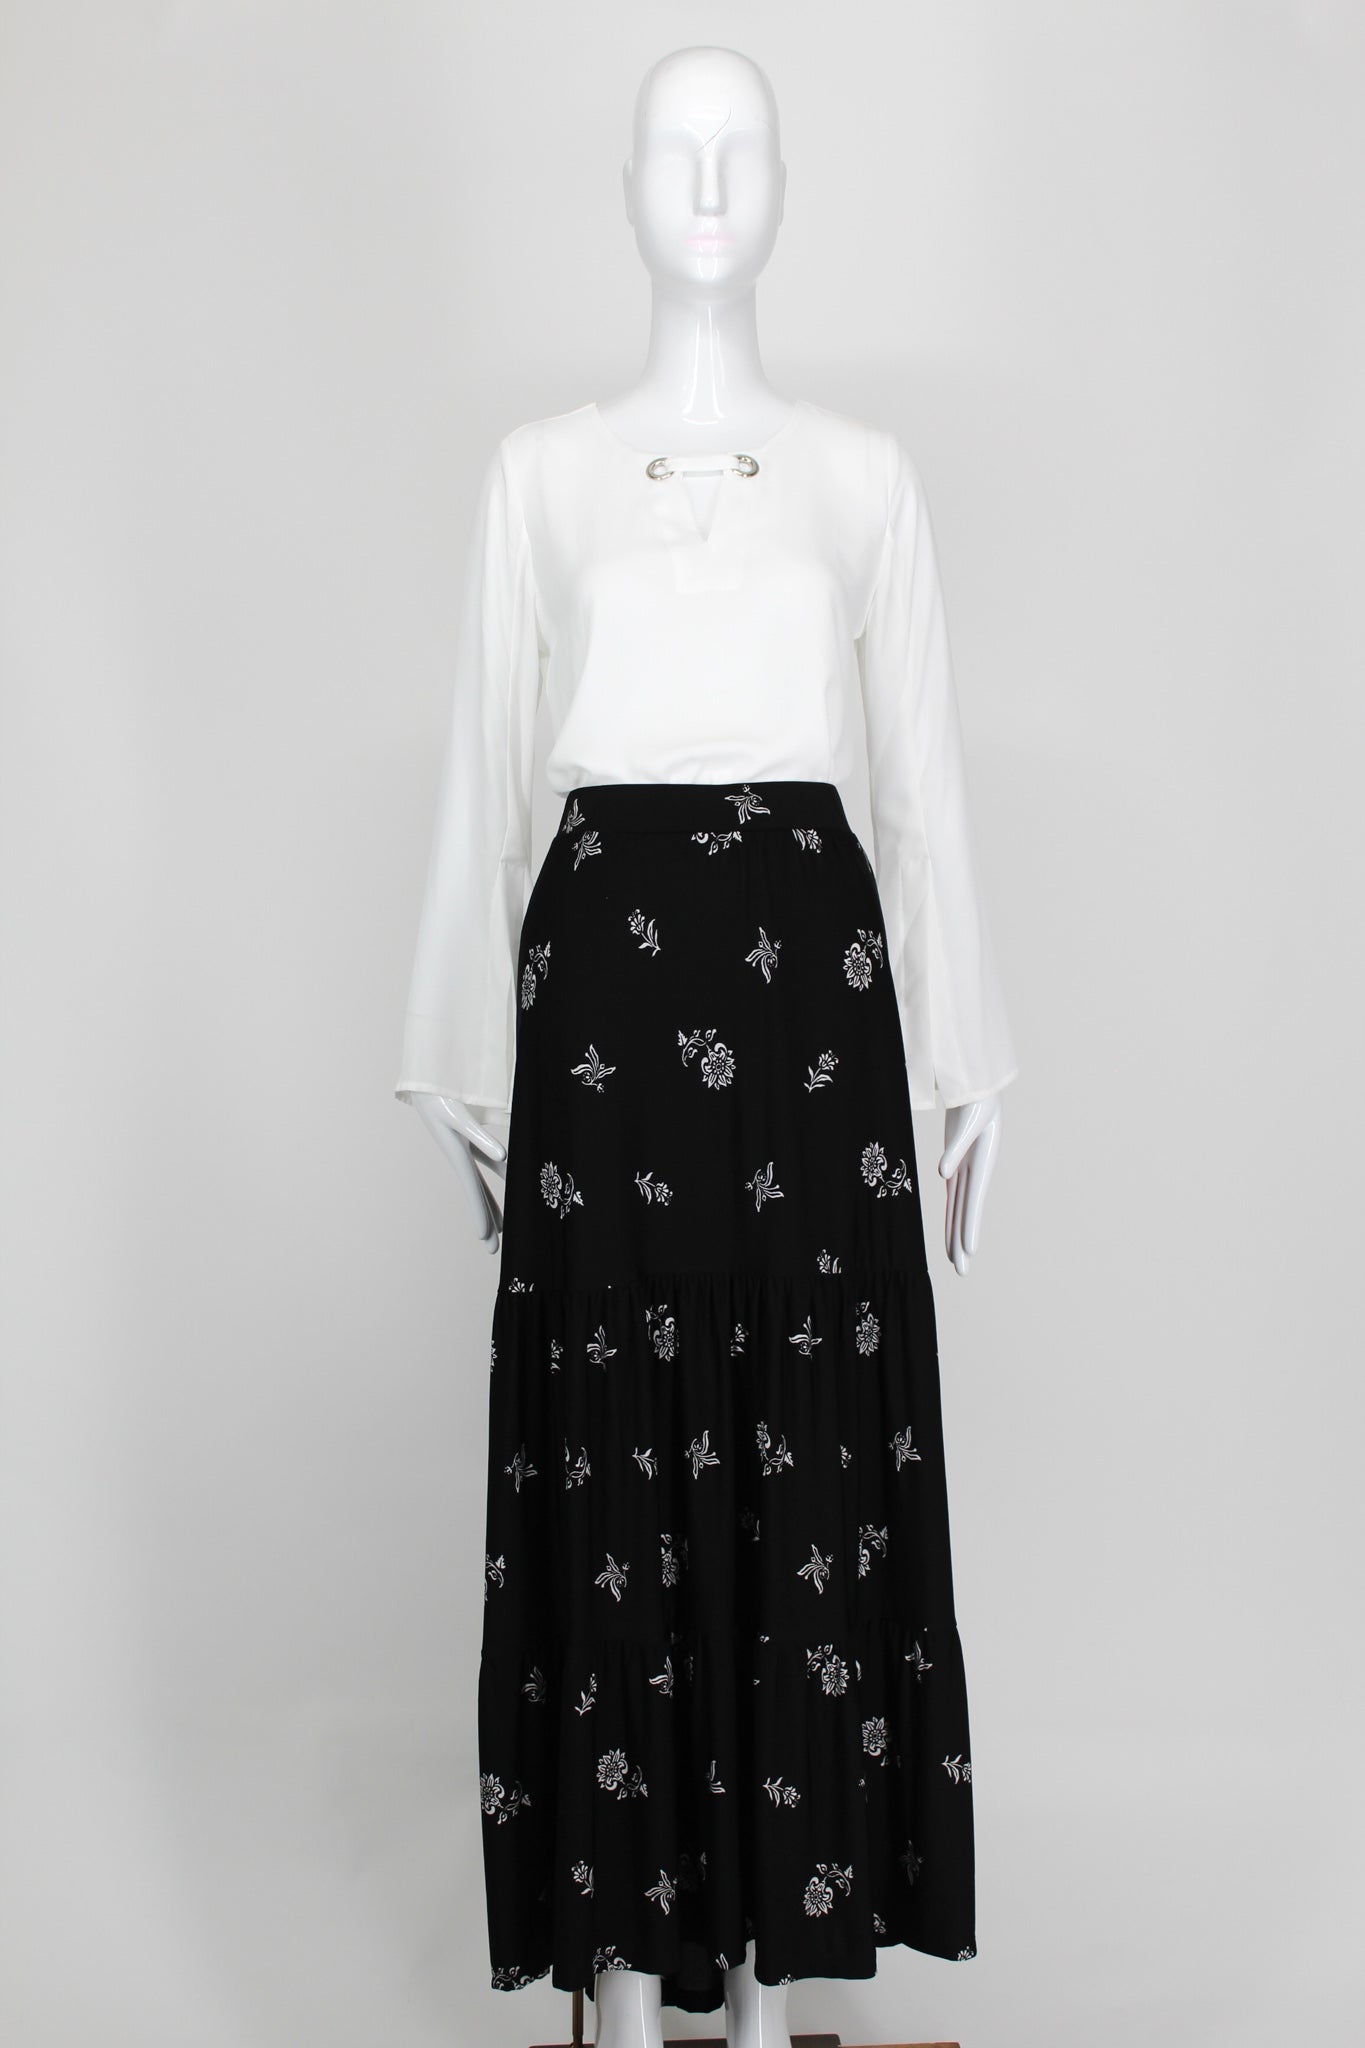 CATHERINE'S BLACK/WHITE FLORAL PRINT TIERED MAXI SKIRT SZ 2X